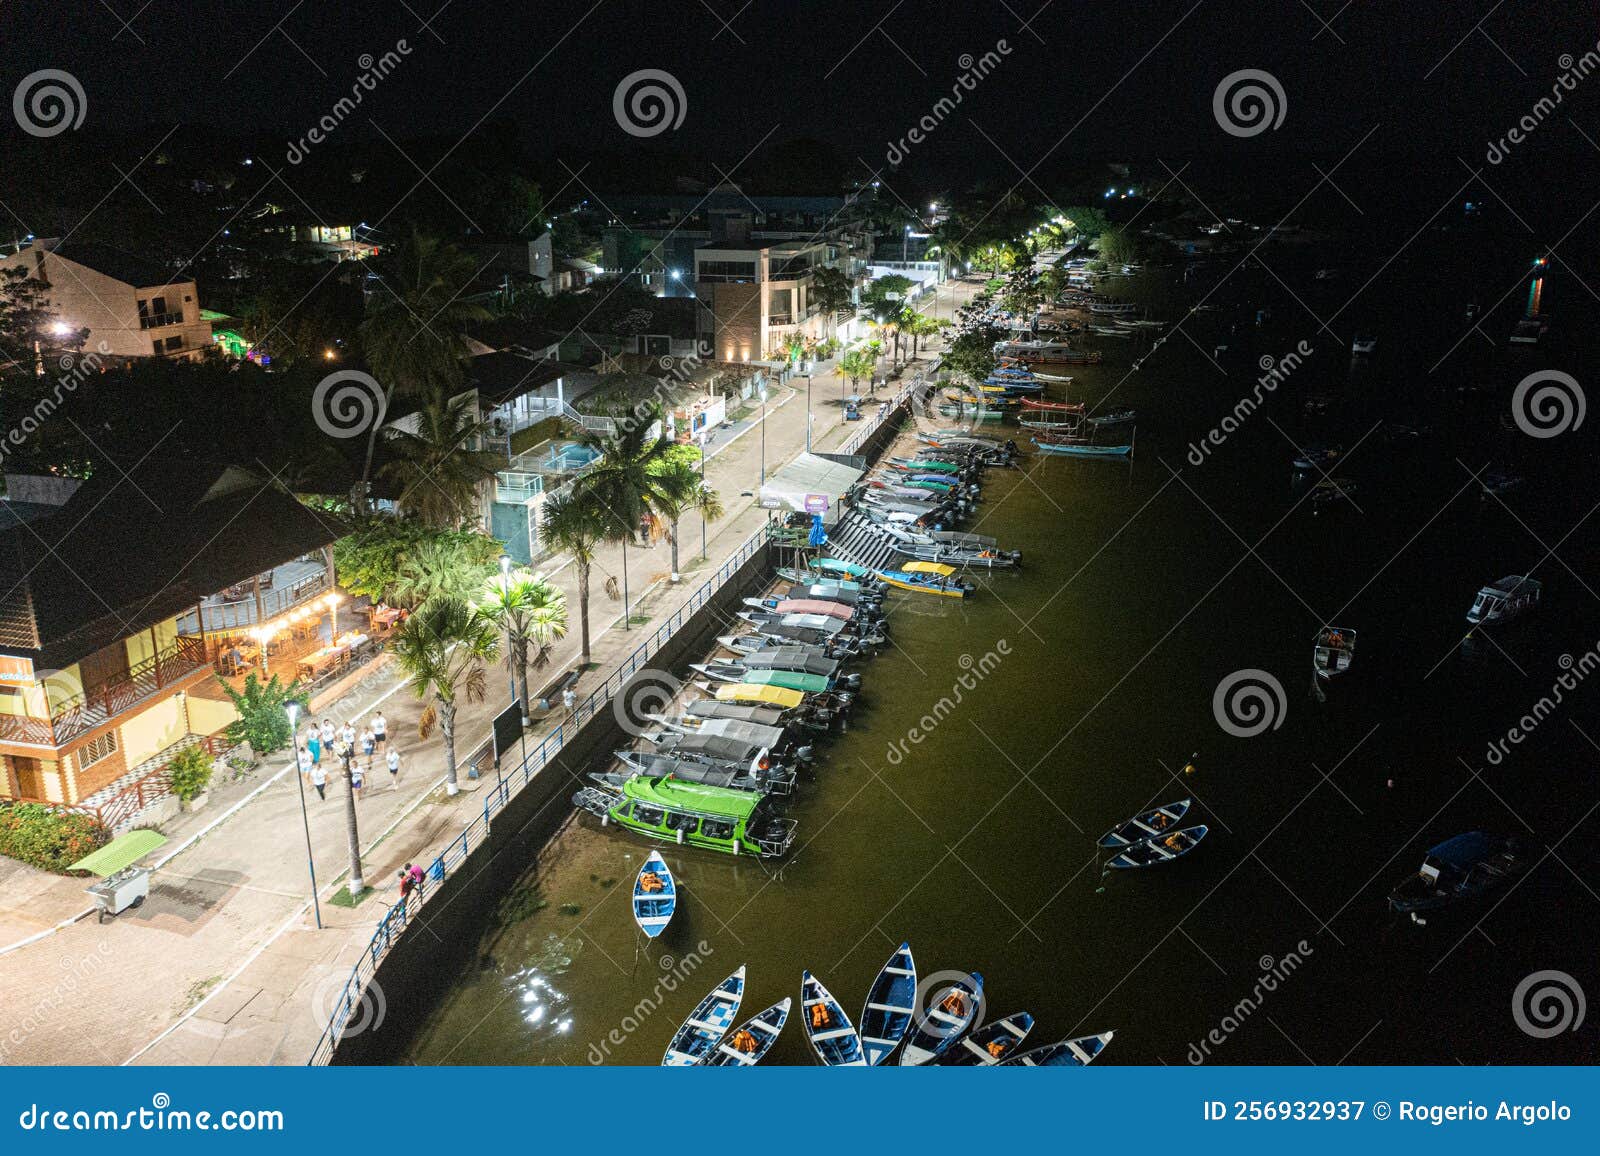 night aerial photo of the waterfront of the city of alter do chÃÂ£o on the tapajÃÂ³s river, parÃÂ¡, brazil.